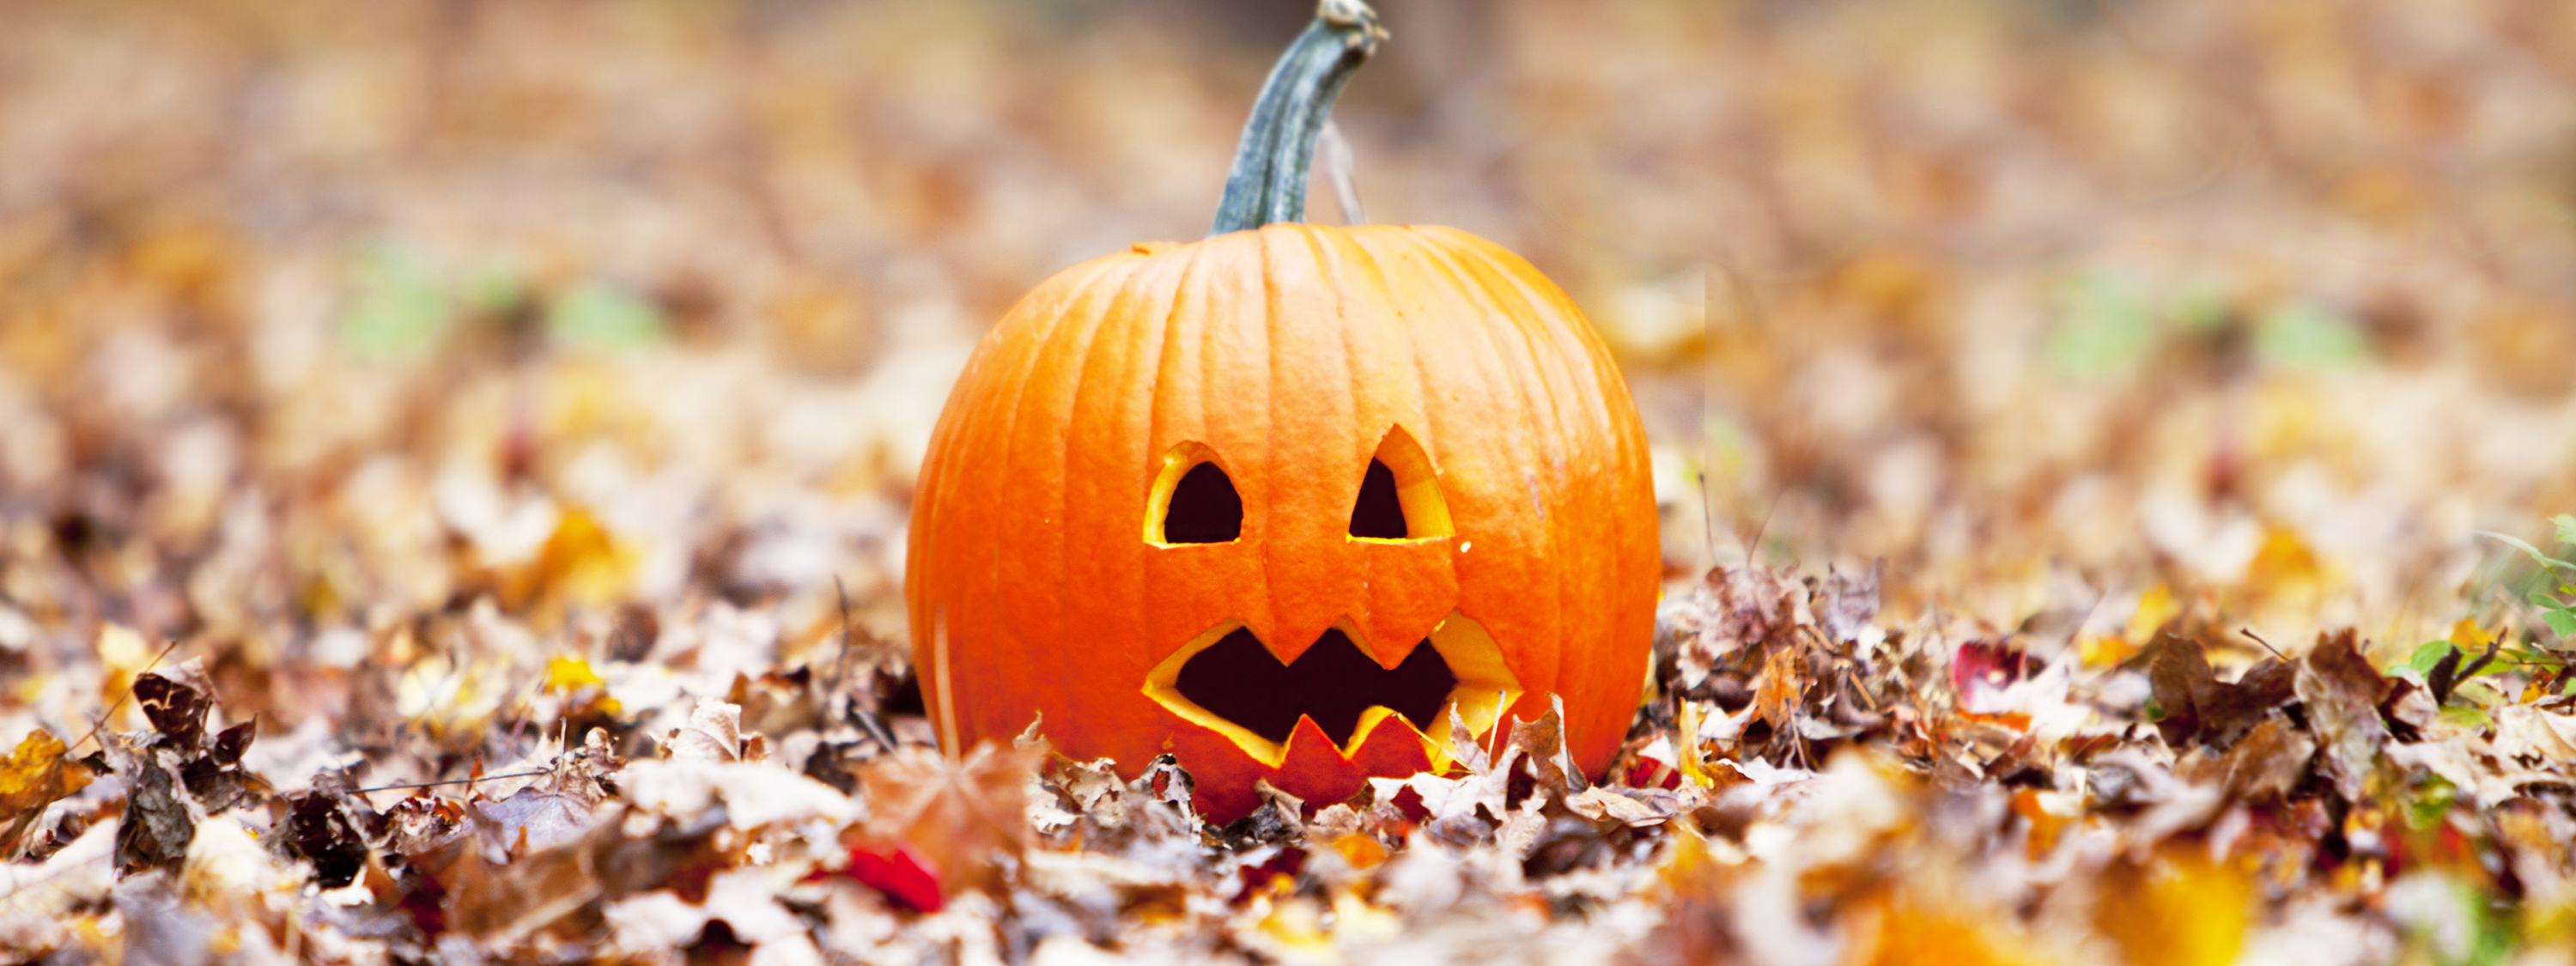 Rainclouds and carved pumpkins – Where is the driest place in the England and Wales in Halloween?